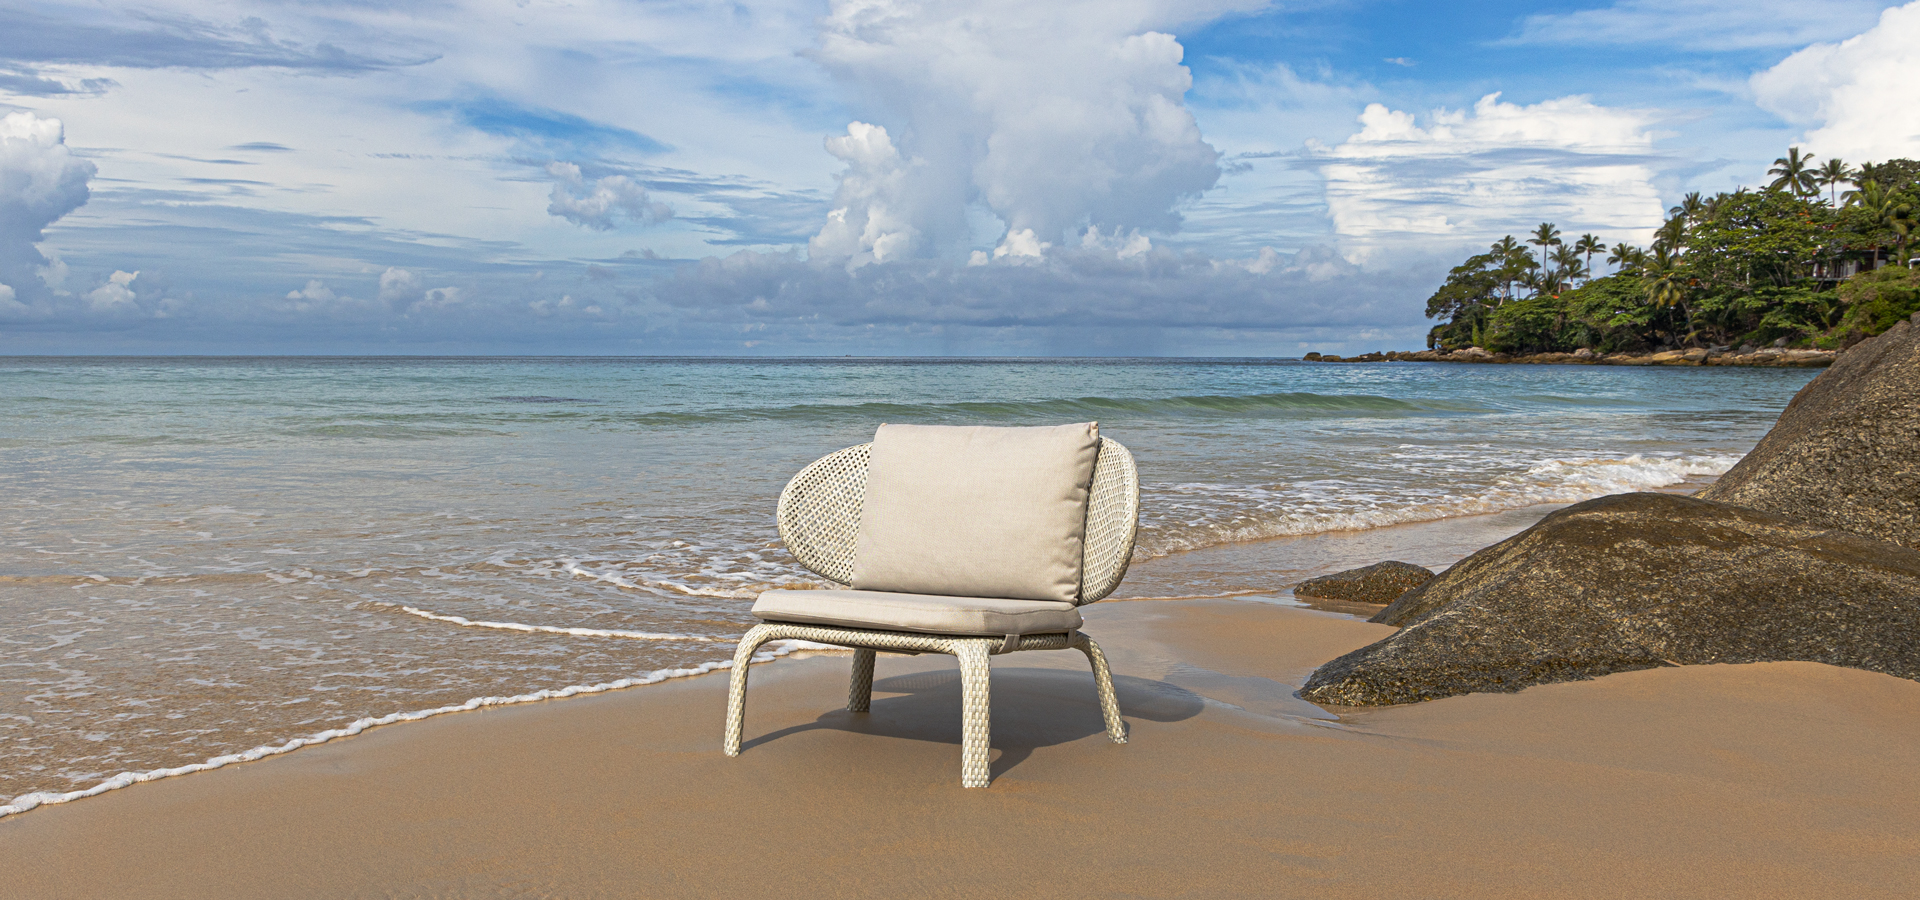 AFFORDABLE LUXURY @ CUSTOMISABLE OUTDOOR FURNITURE